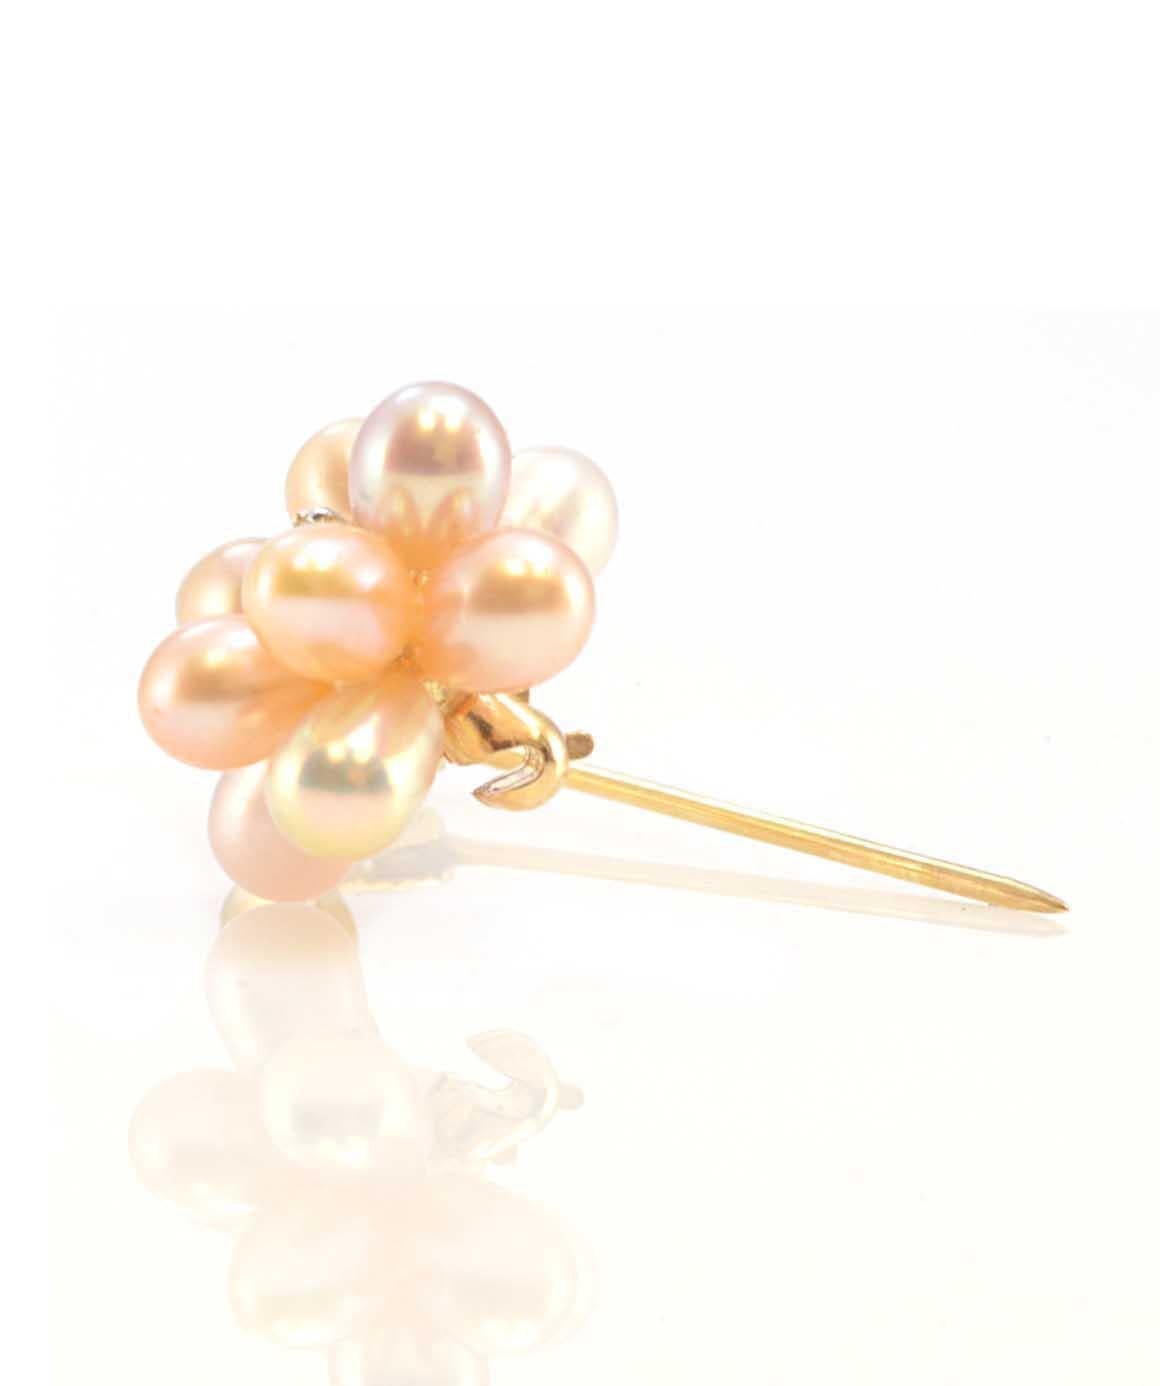 Solid 14 Karat Yellow Gold Pearl and Diamond Flower Pin 2.5g 1